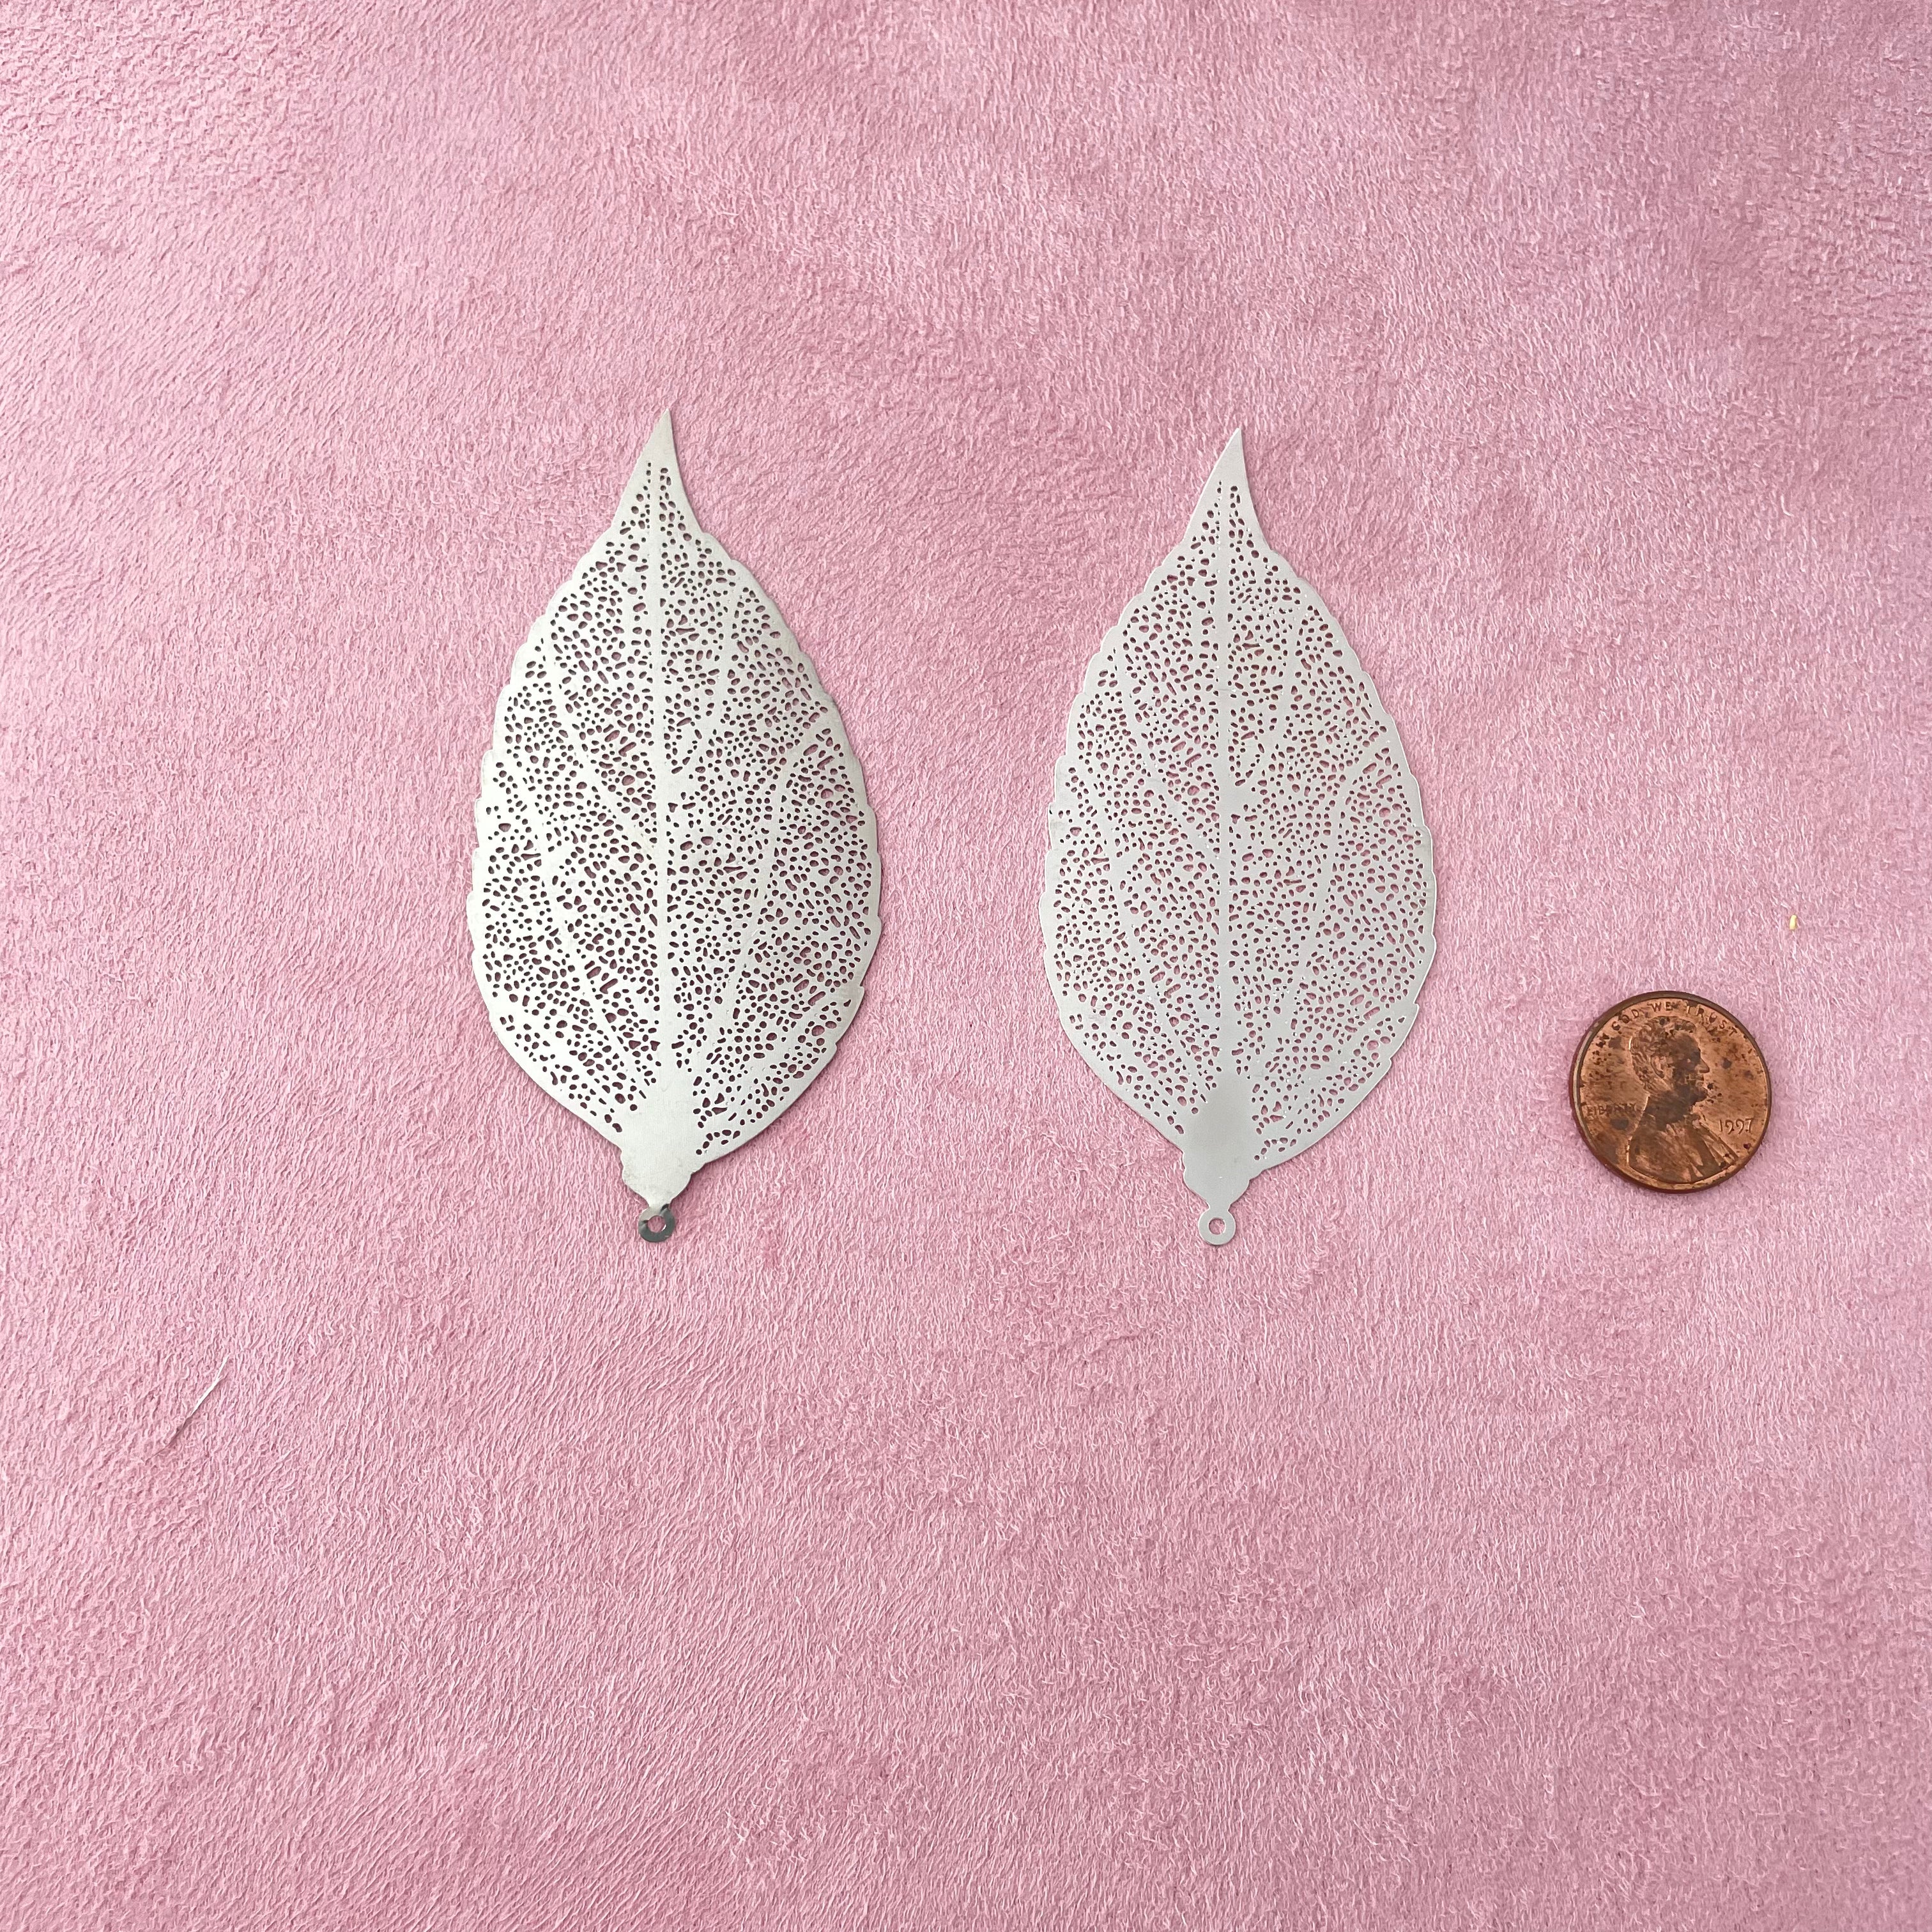 2 silver leaves that are larger with penny beside for size reference - wedding flat lay props from Champagne & GRIT